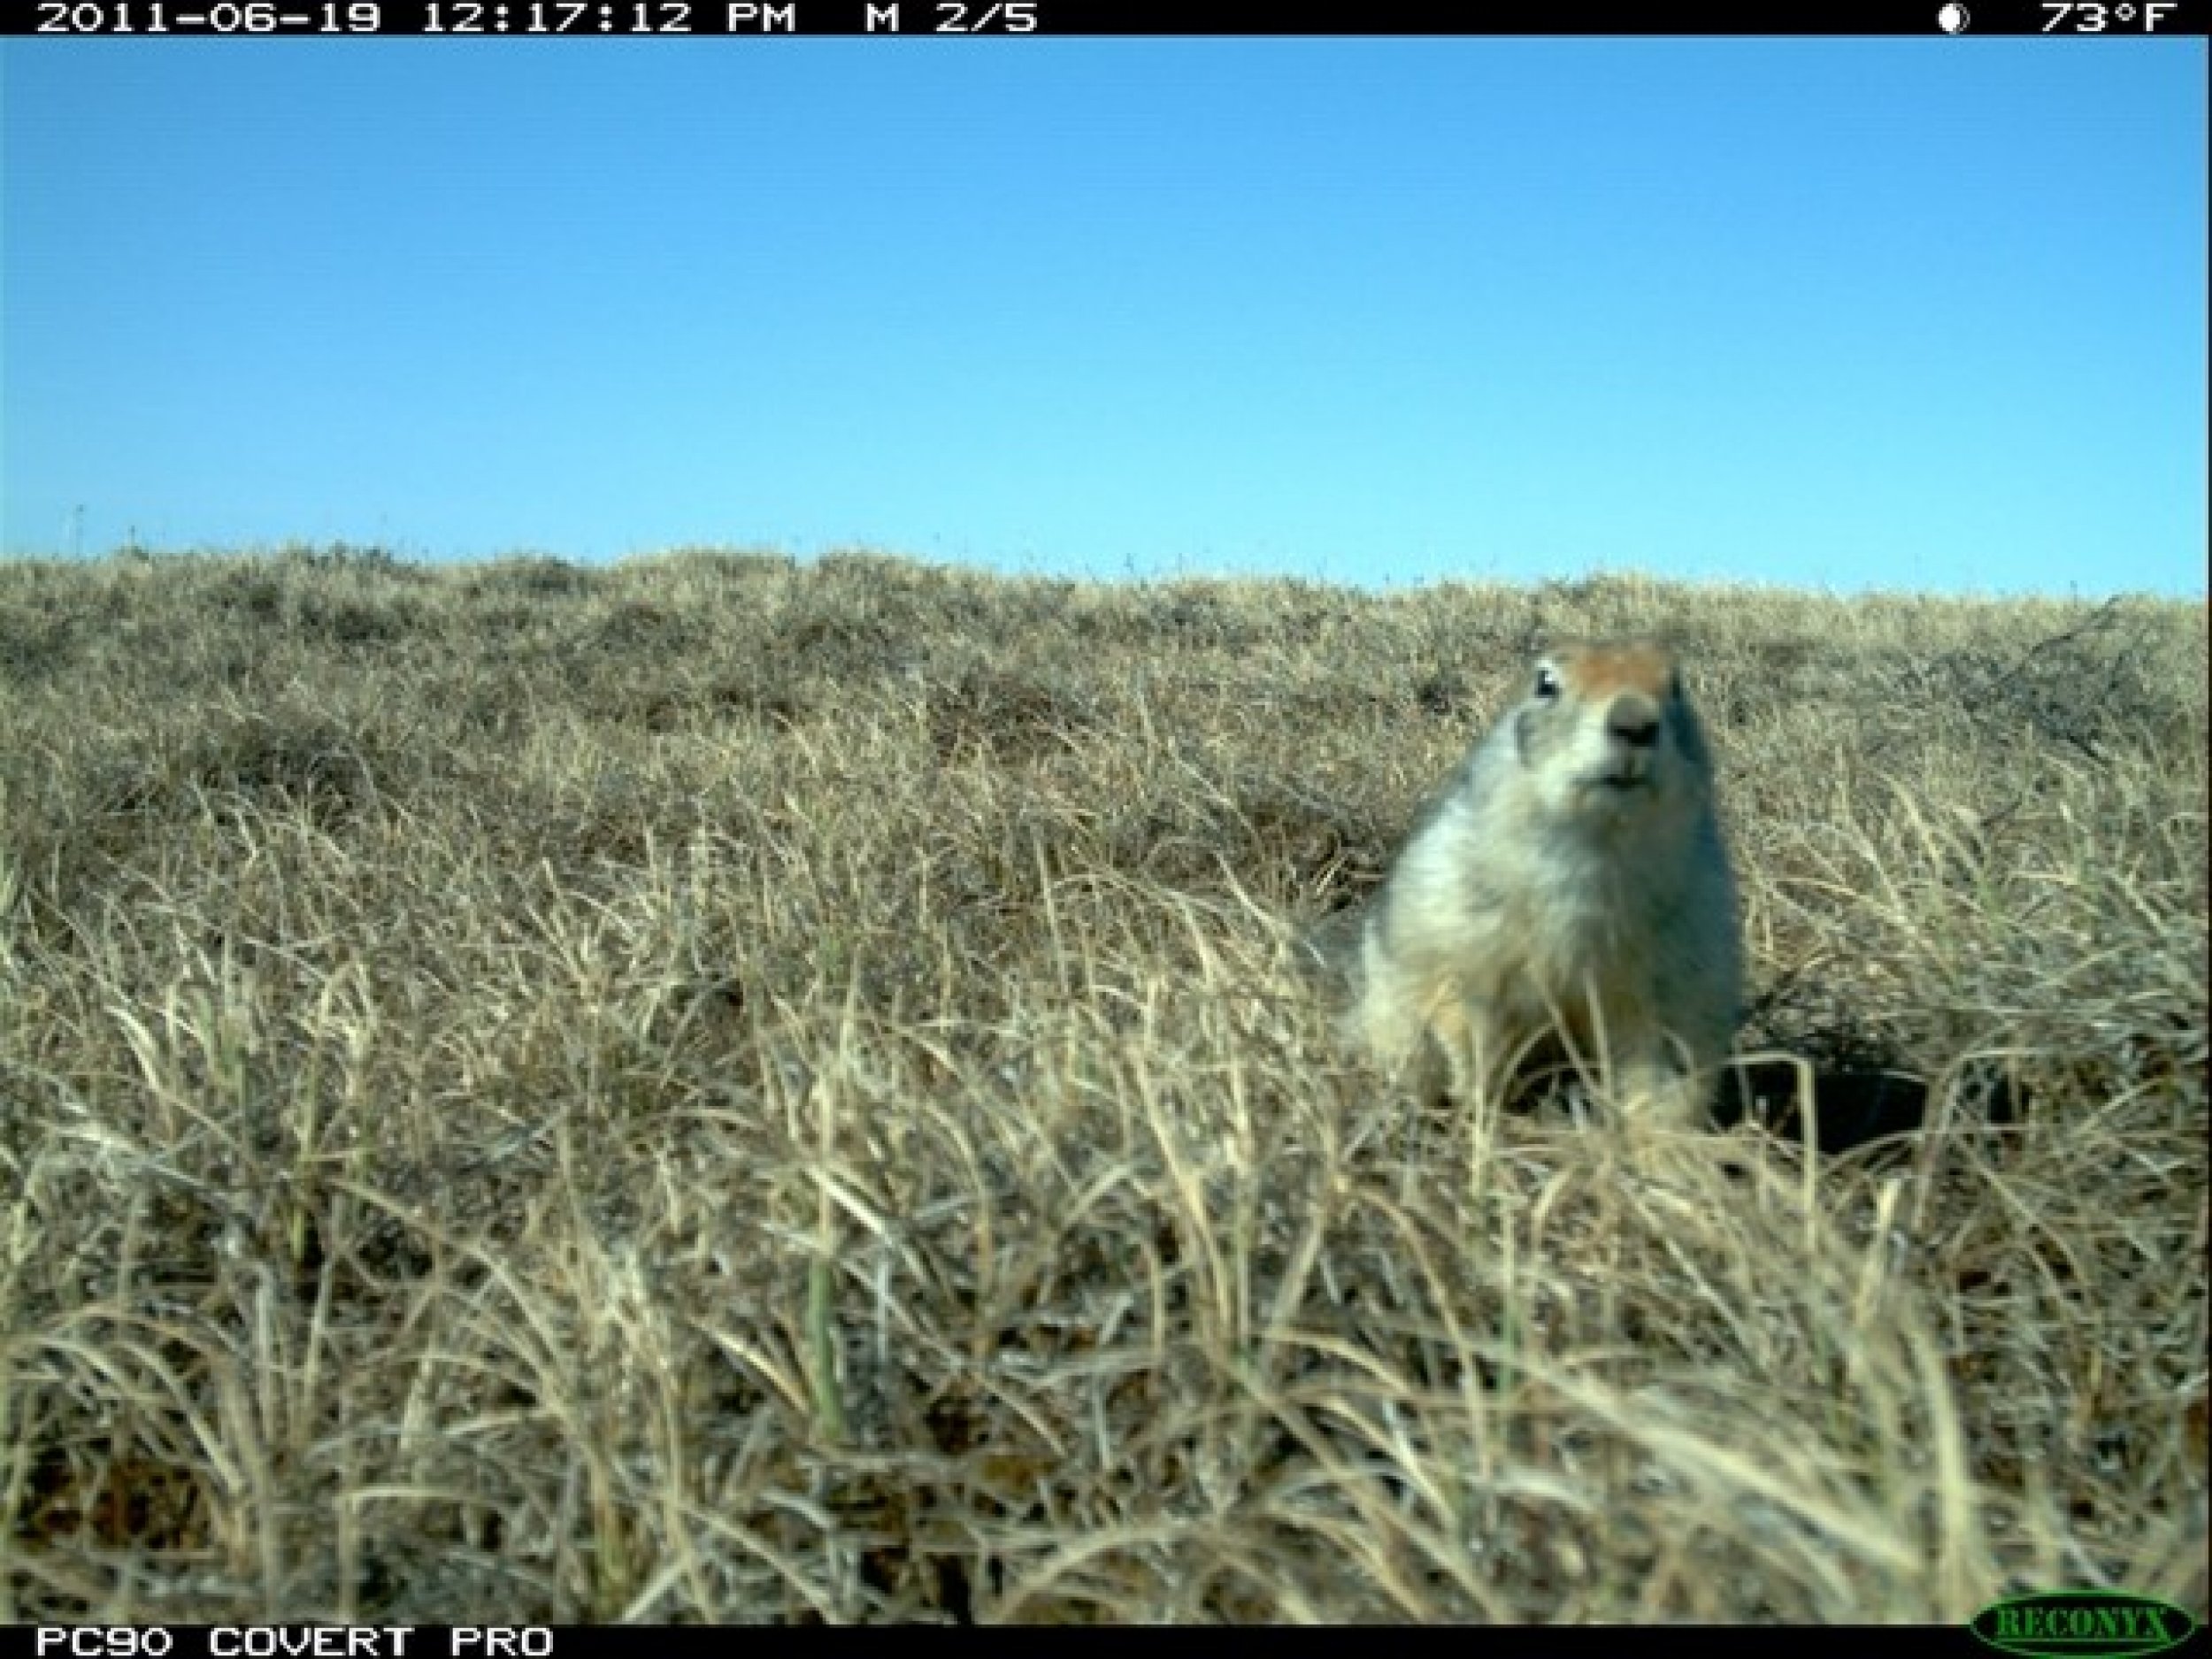 Near the Ikpikpuk River, the most common nest predators are arctic ground squirrels like this one caught by the camera.